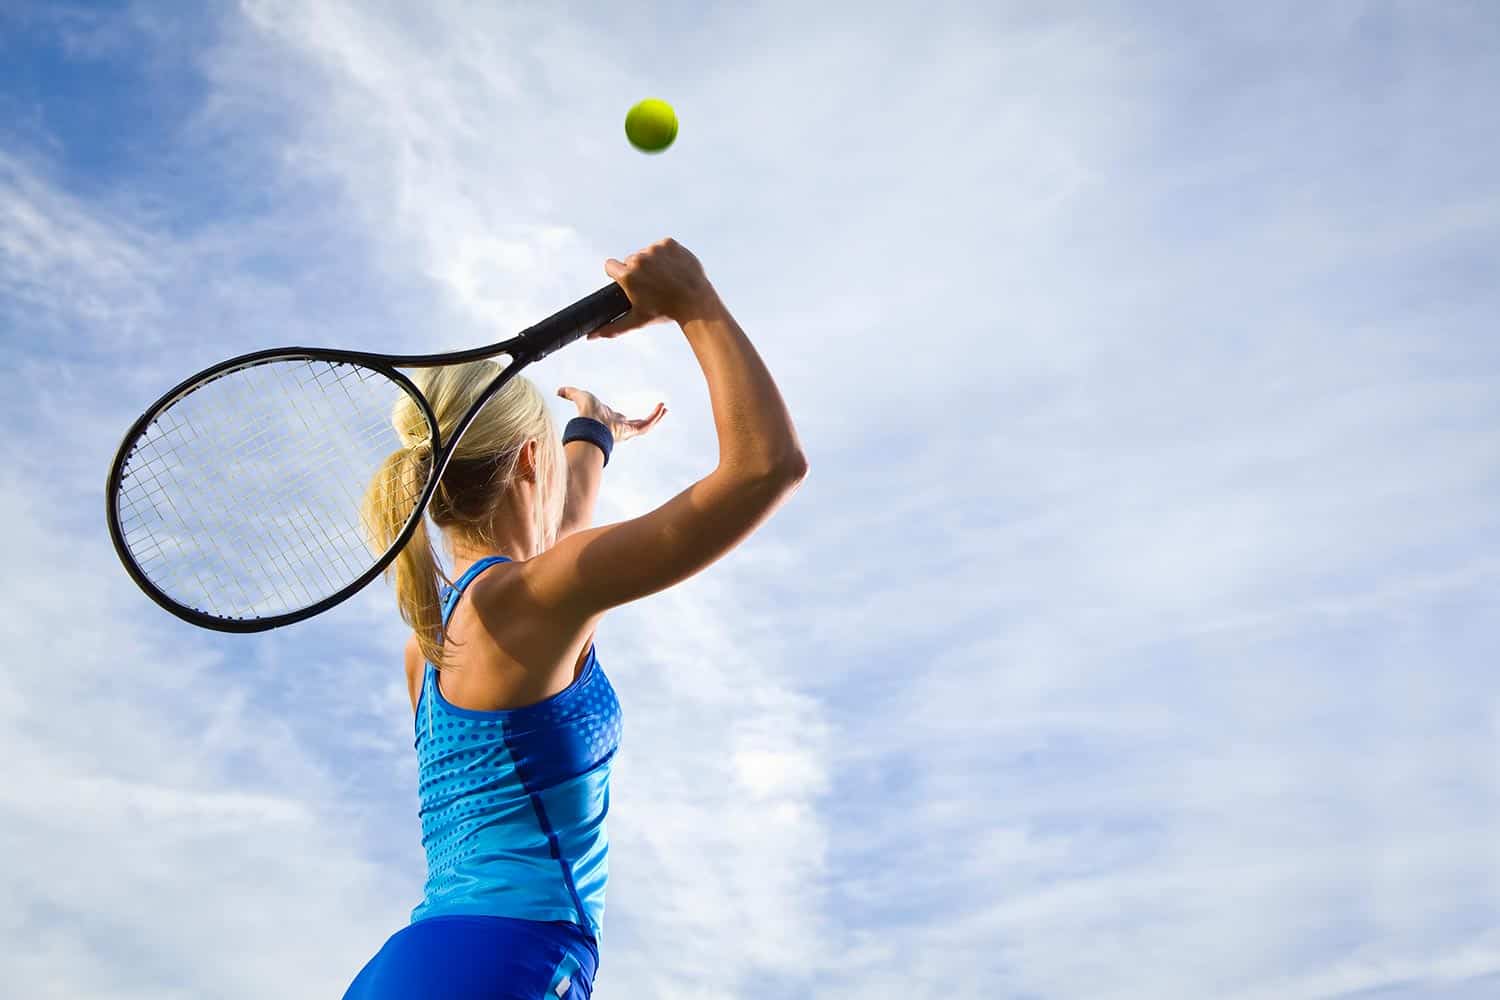 Woman on tennis court playing tennis